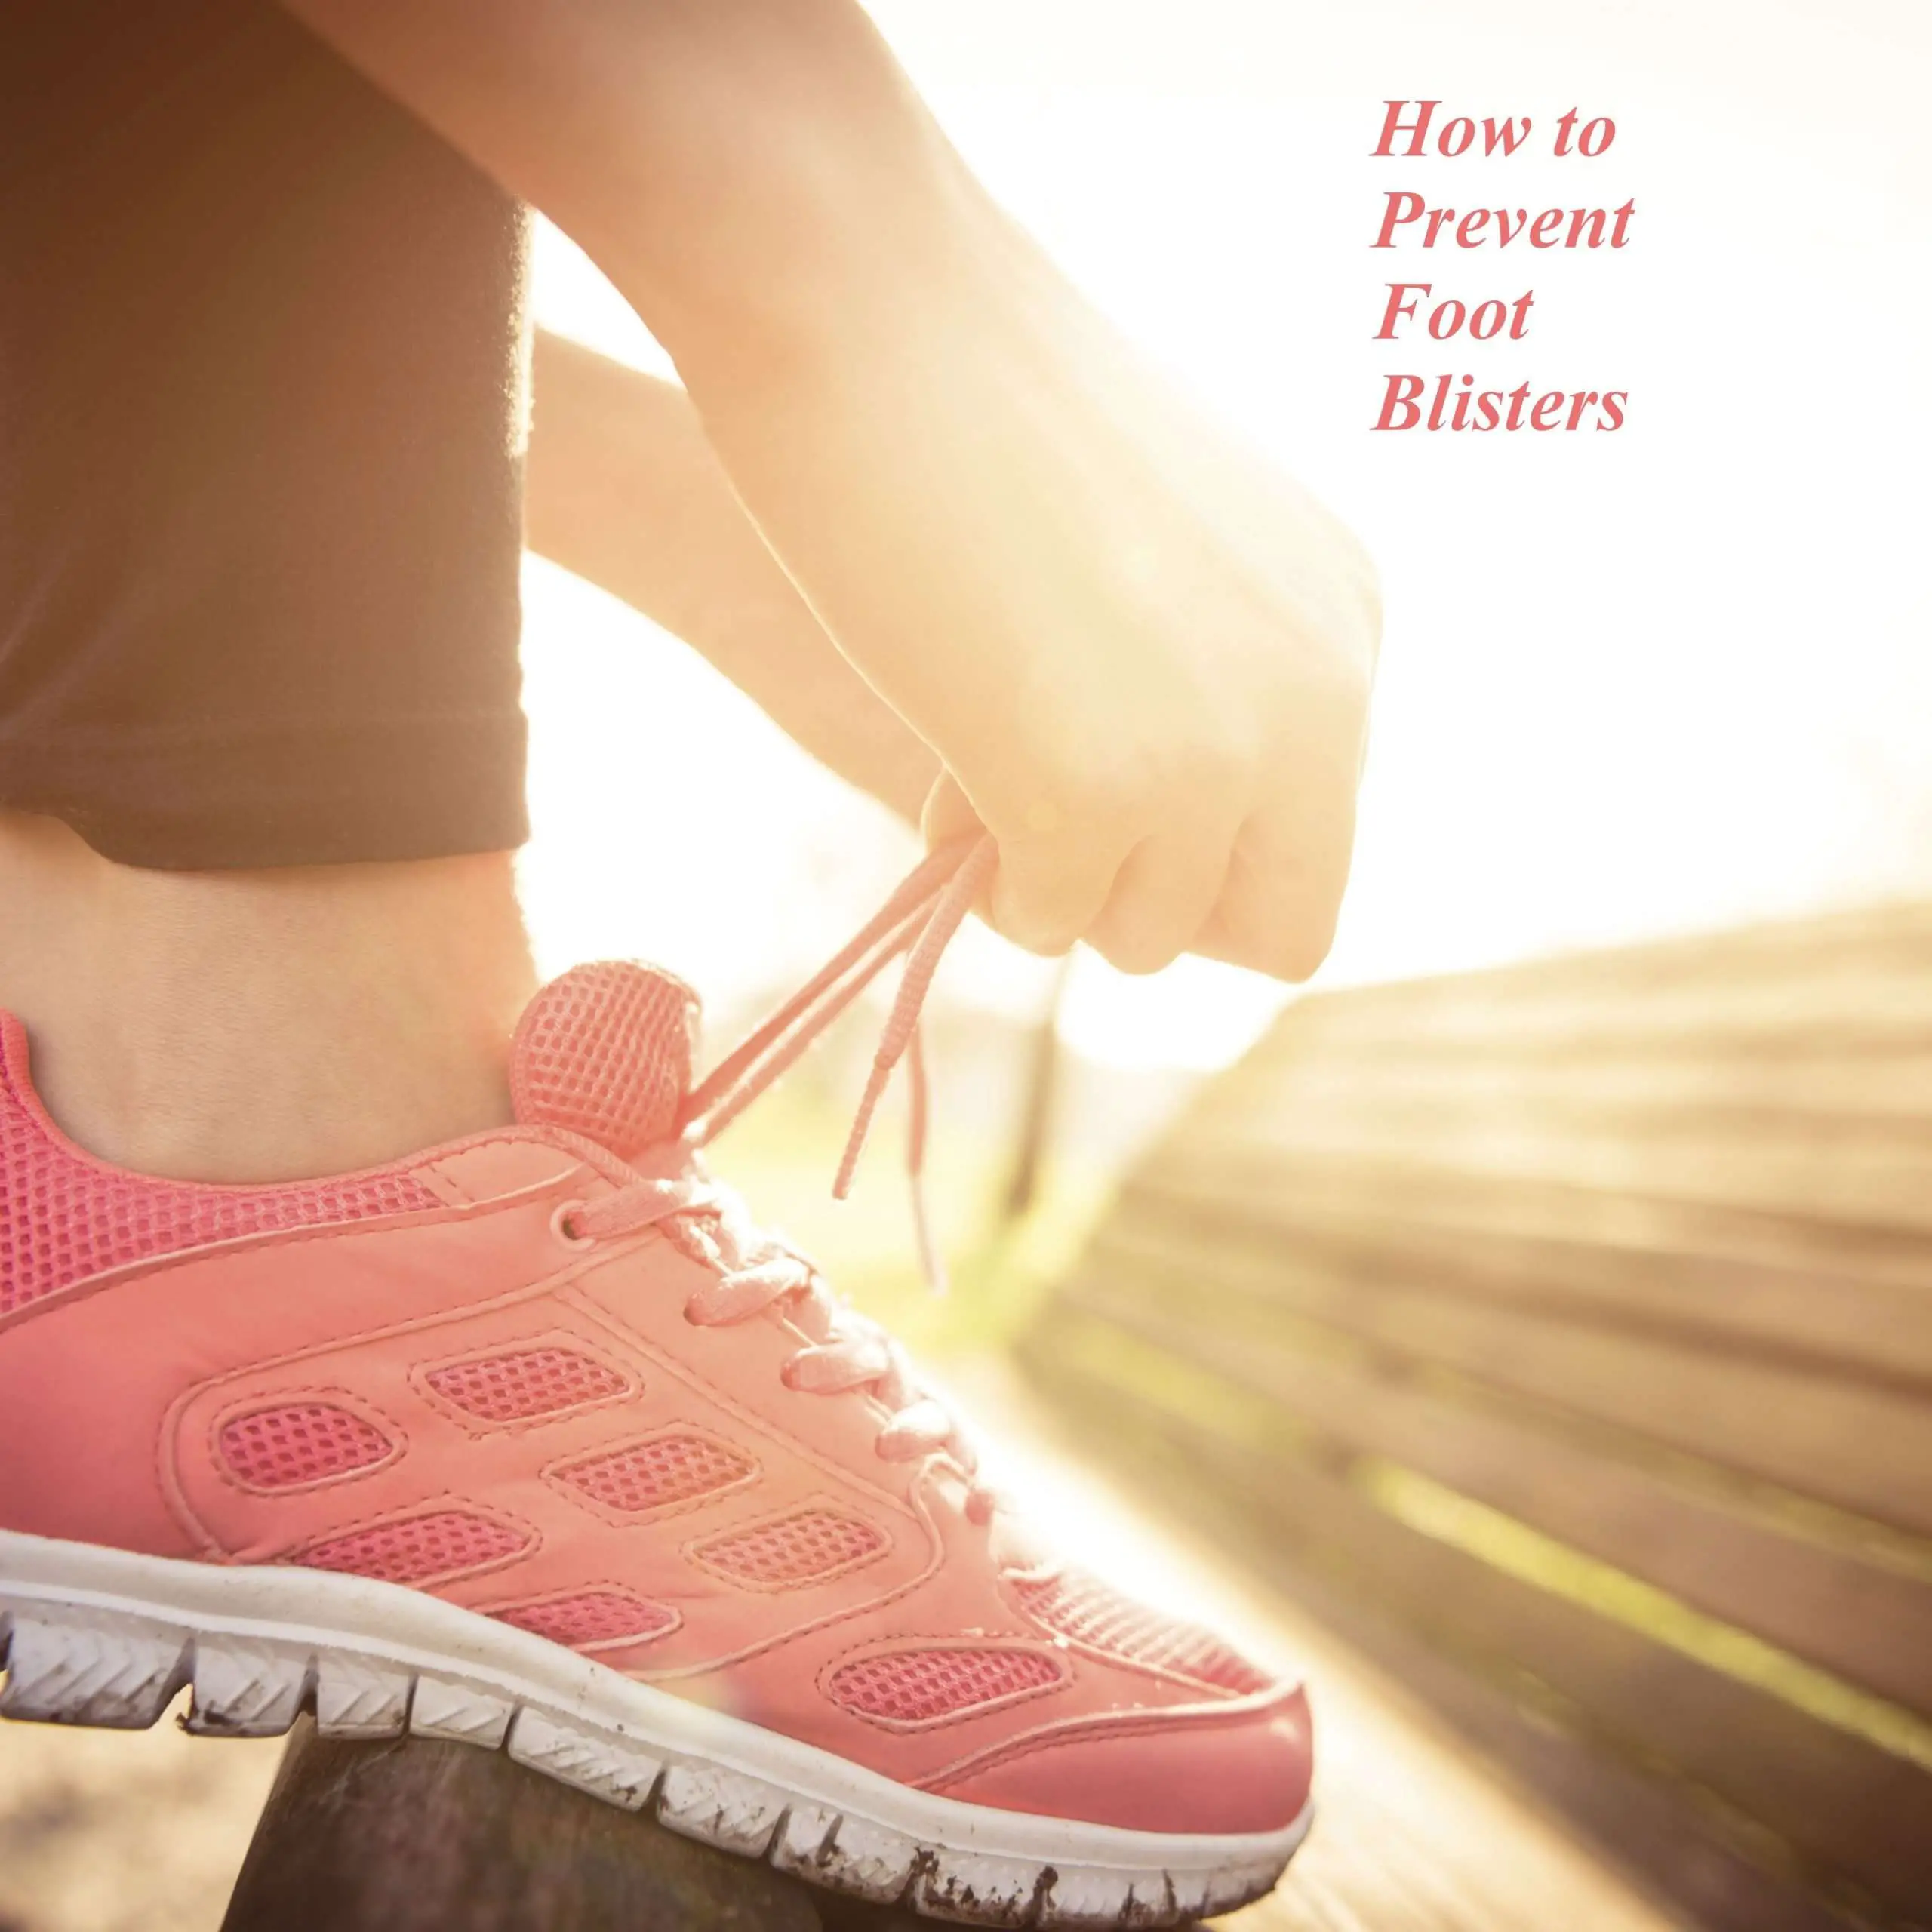 How to Prevent Foot Blisters.